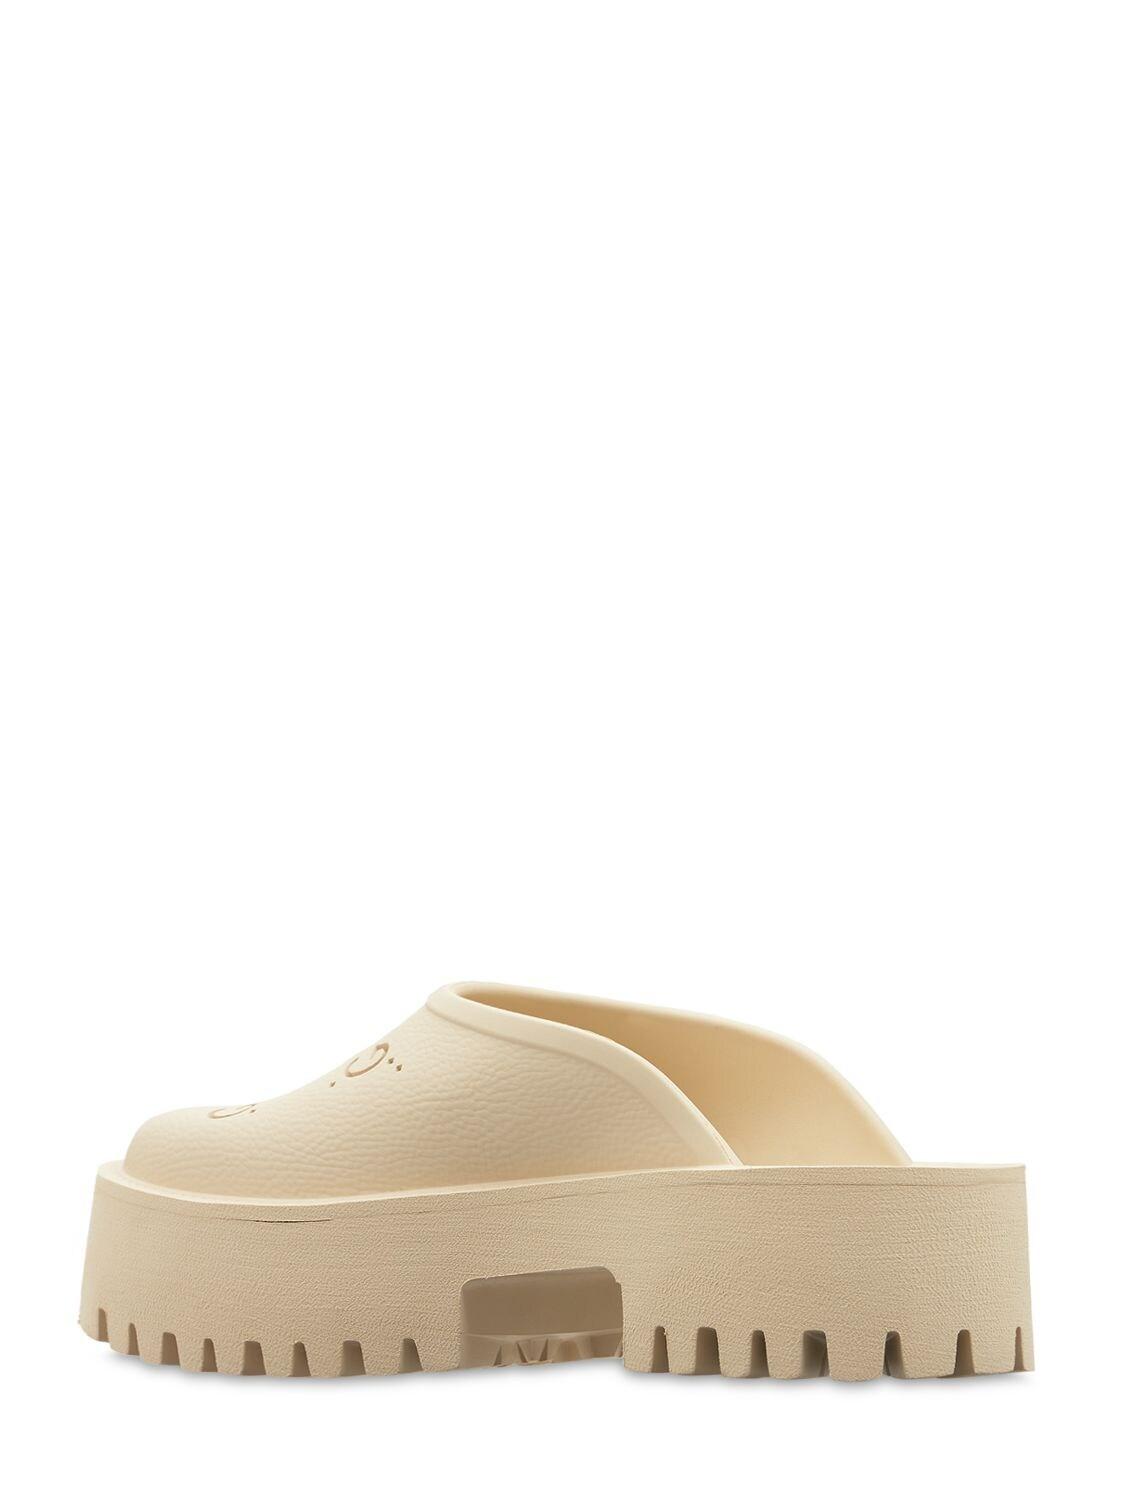 Gucci Rubber 55mm Elea Perforated G Platform Sandals in Ivory 